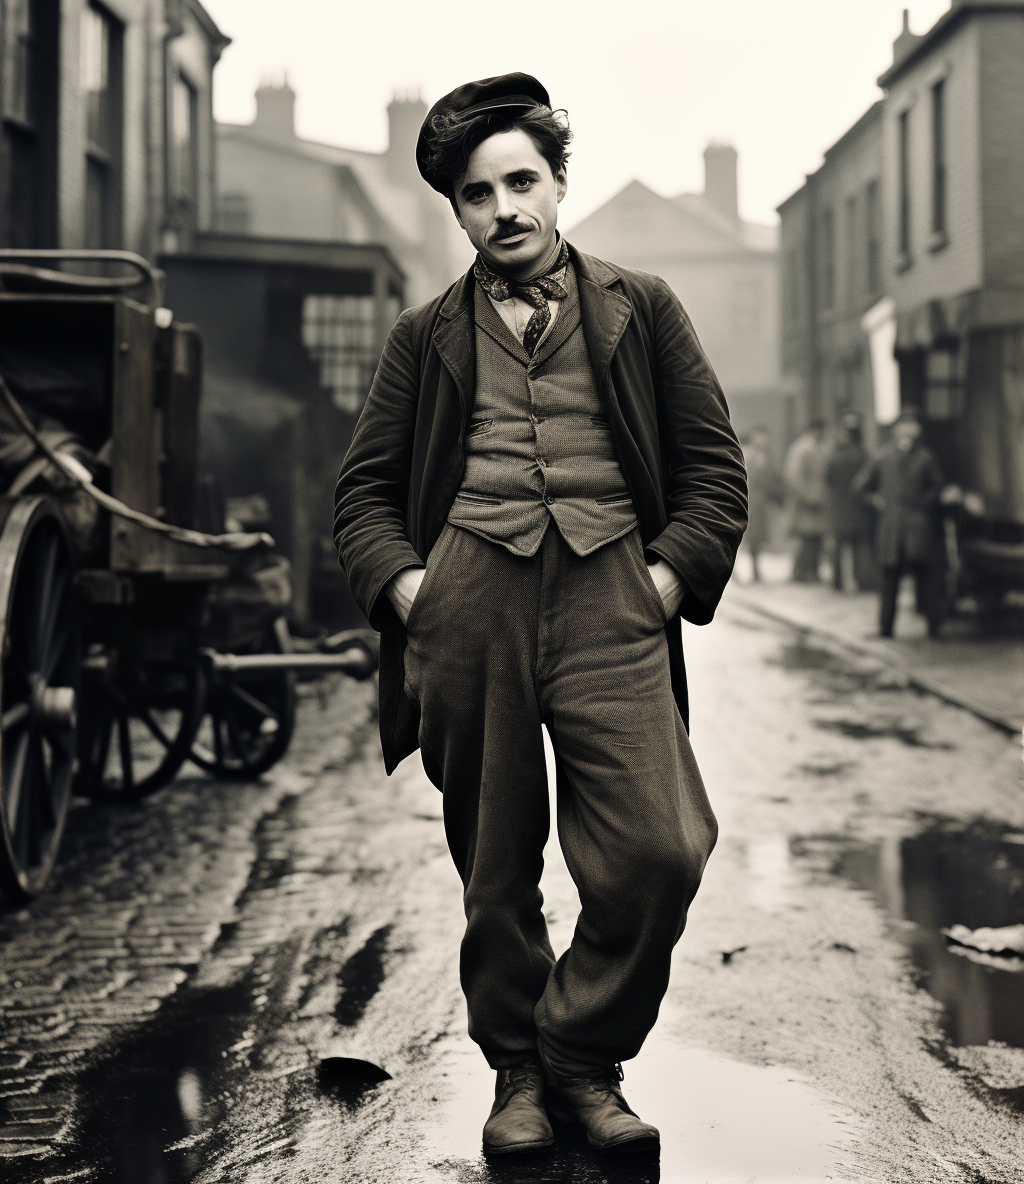 charlie chaplin fancy dress competition - YouTube